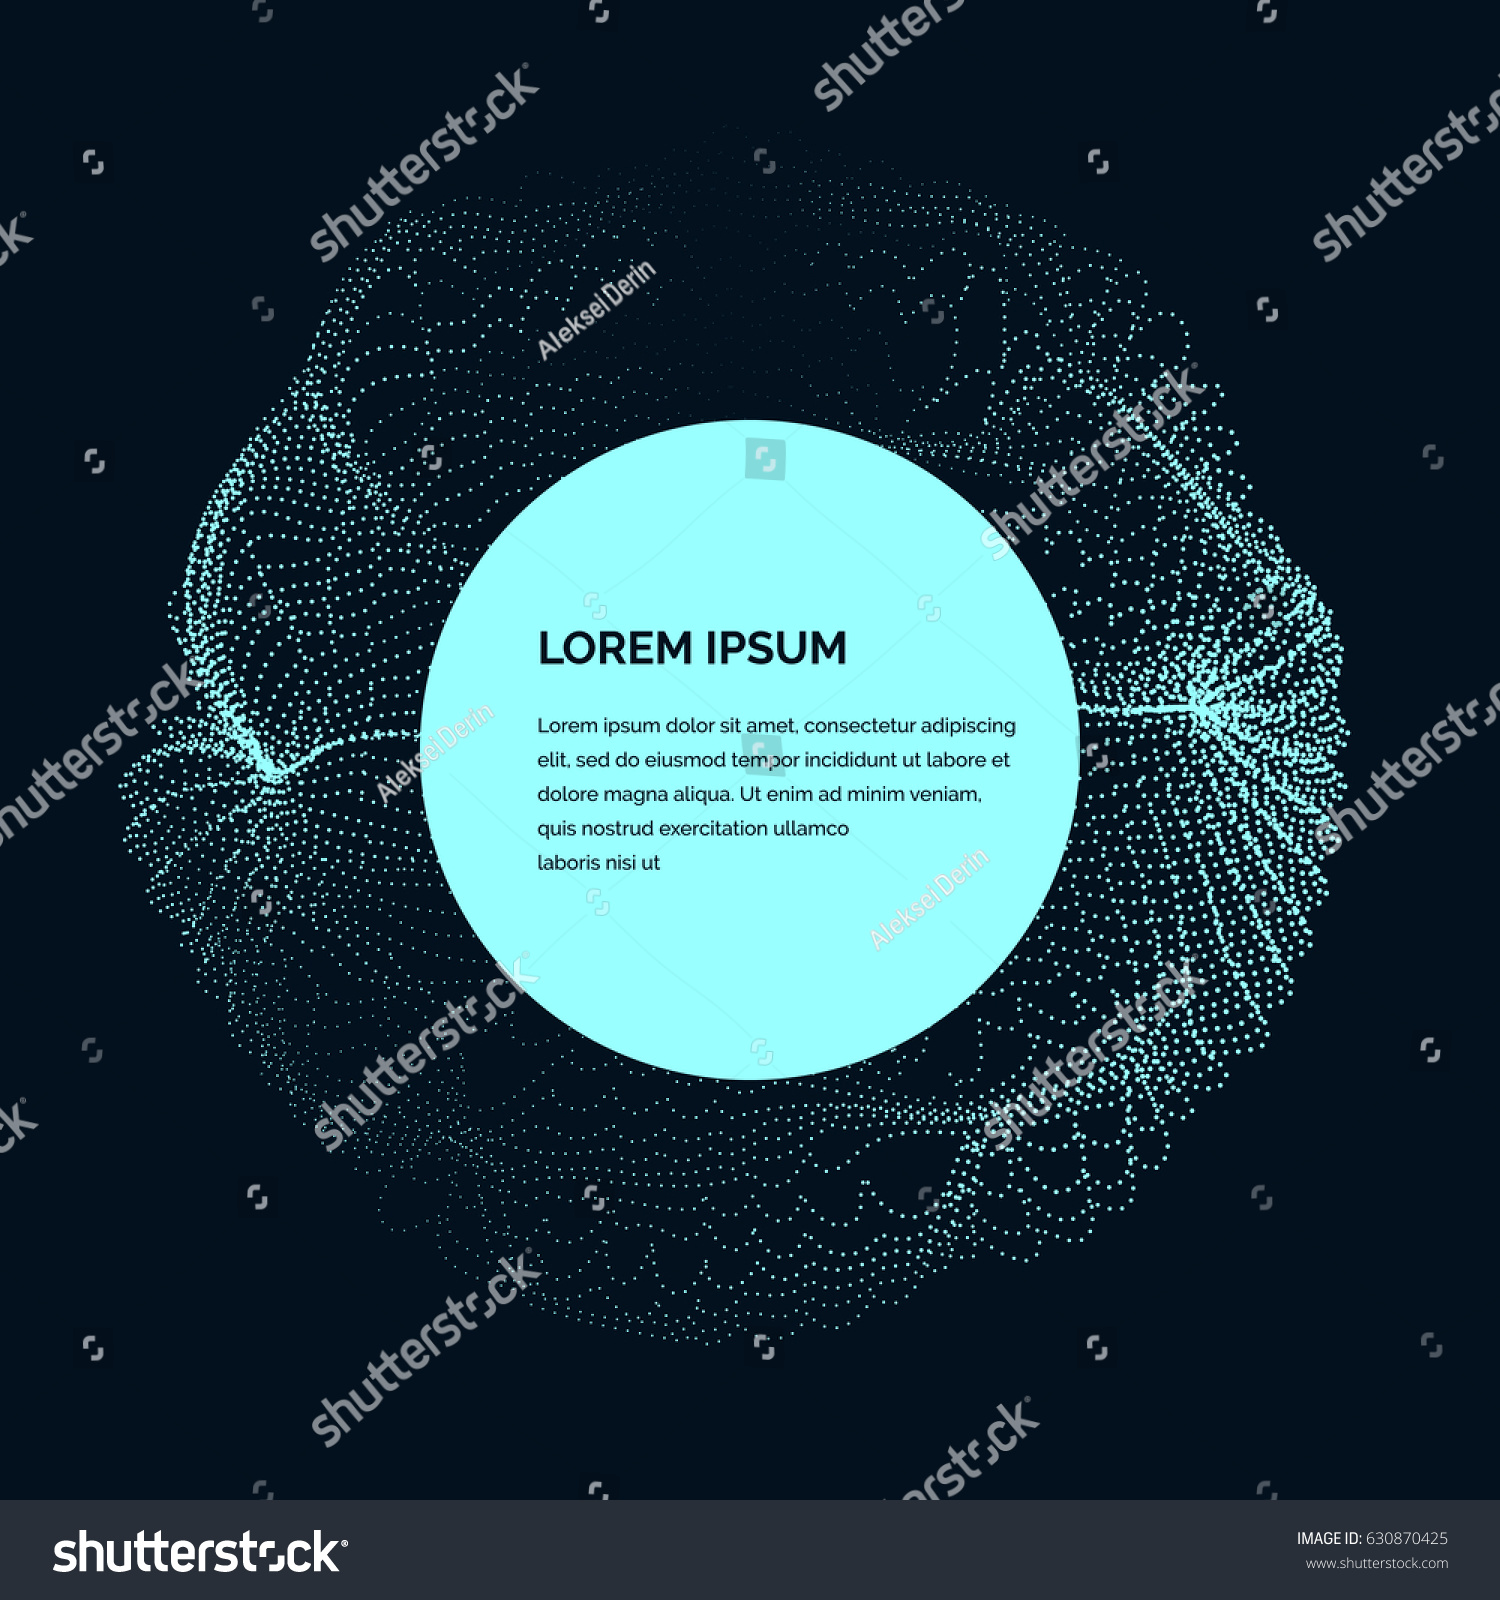 Modern vector illustration with a deformed circle shape of the particles of blue color on a dark background. Good as a template for your design #630870425